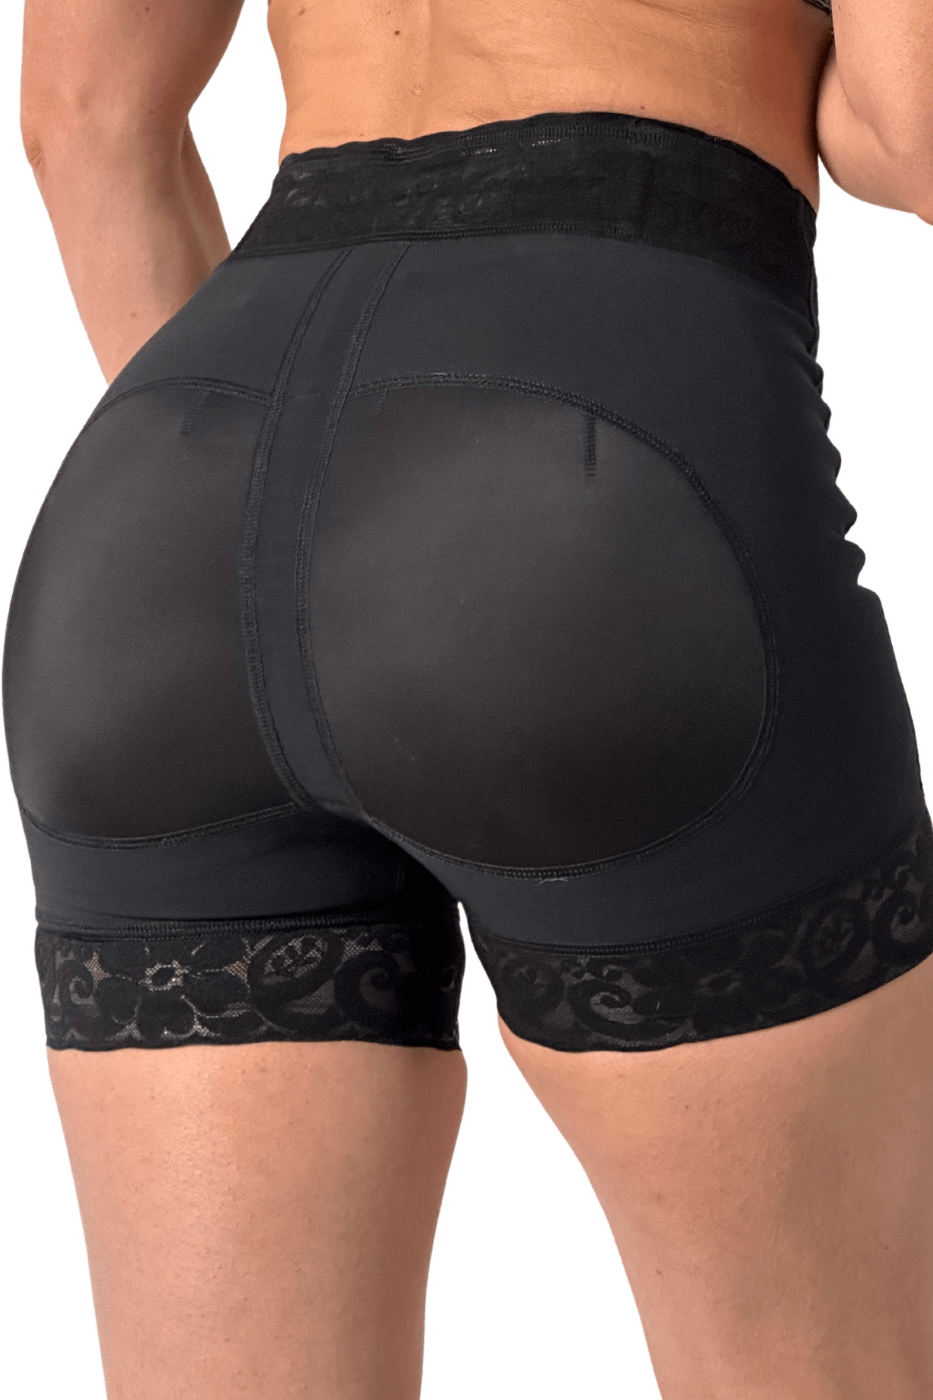 Body Shaper Lace Cut Out Spandex Butt Lifter - Power Day Sale